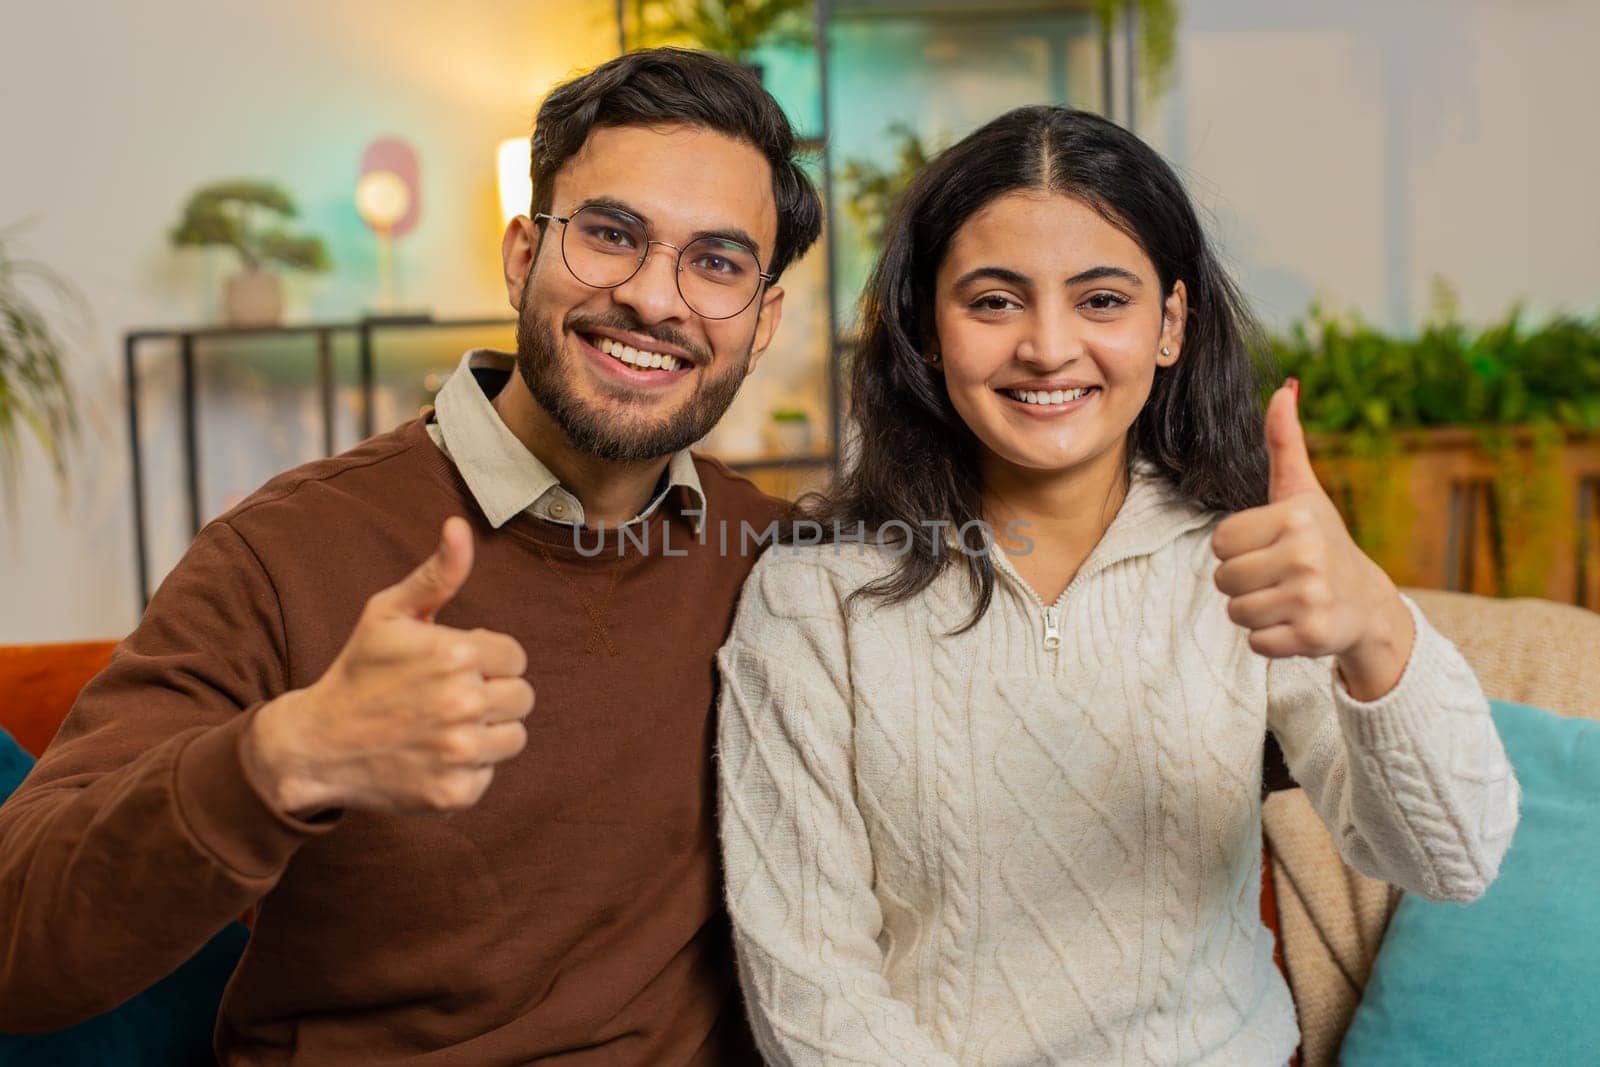 Smiling young Hispanic couple sits arm around show thumbs up on sofa in living room at home. Portrait of happy diverse family in casual clothes together looking at camera giving approval good feedback